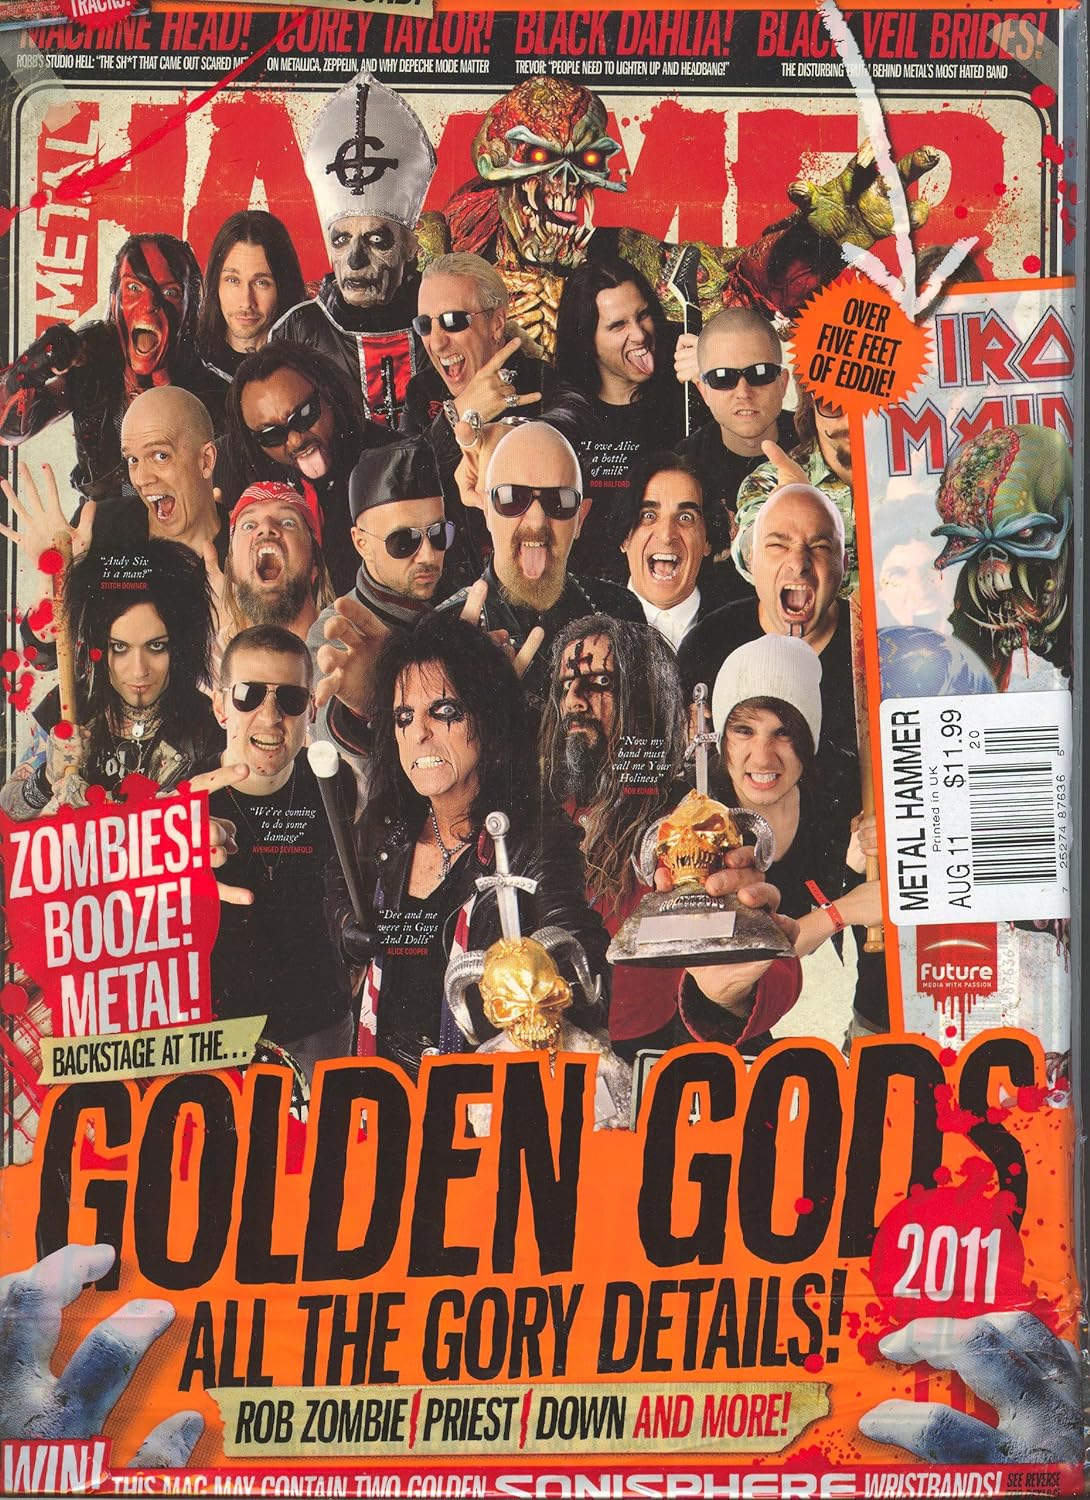 August 2011 Metal Hammer Issue 220 Cover